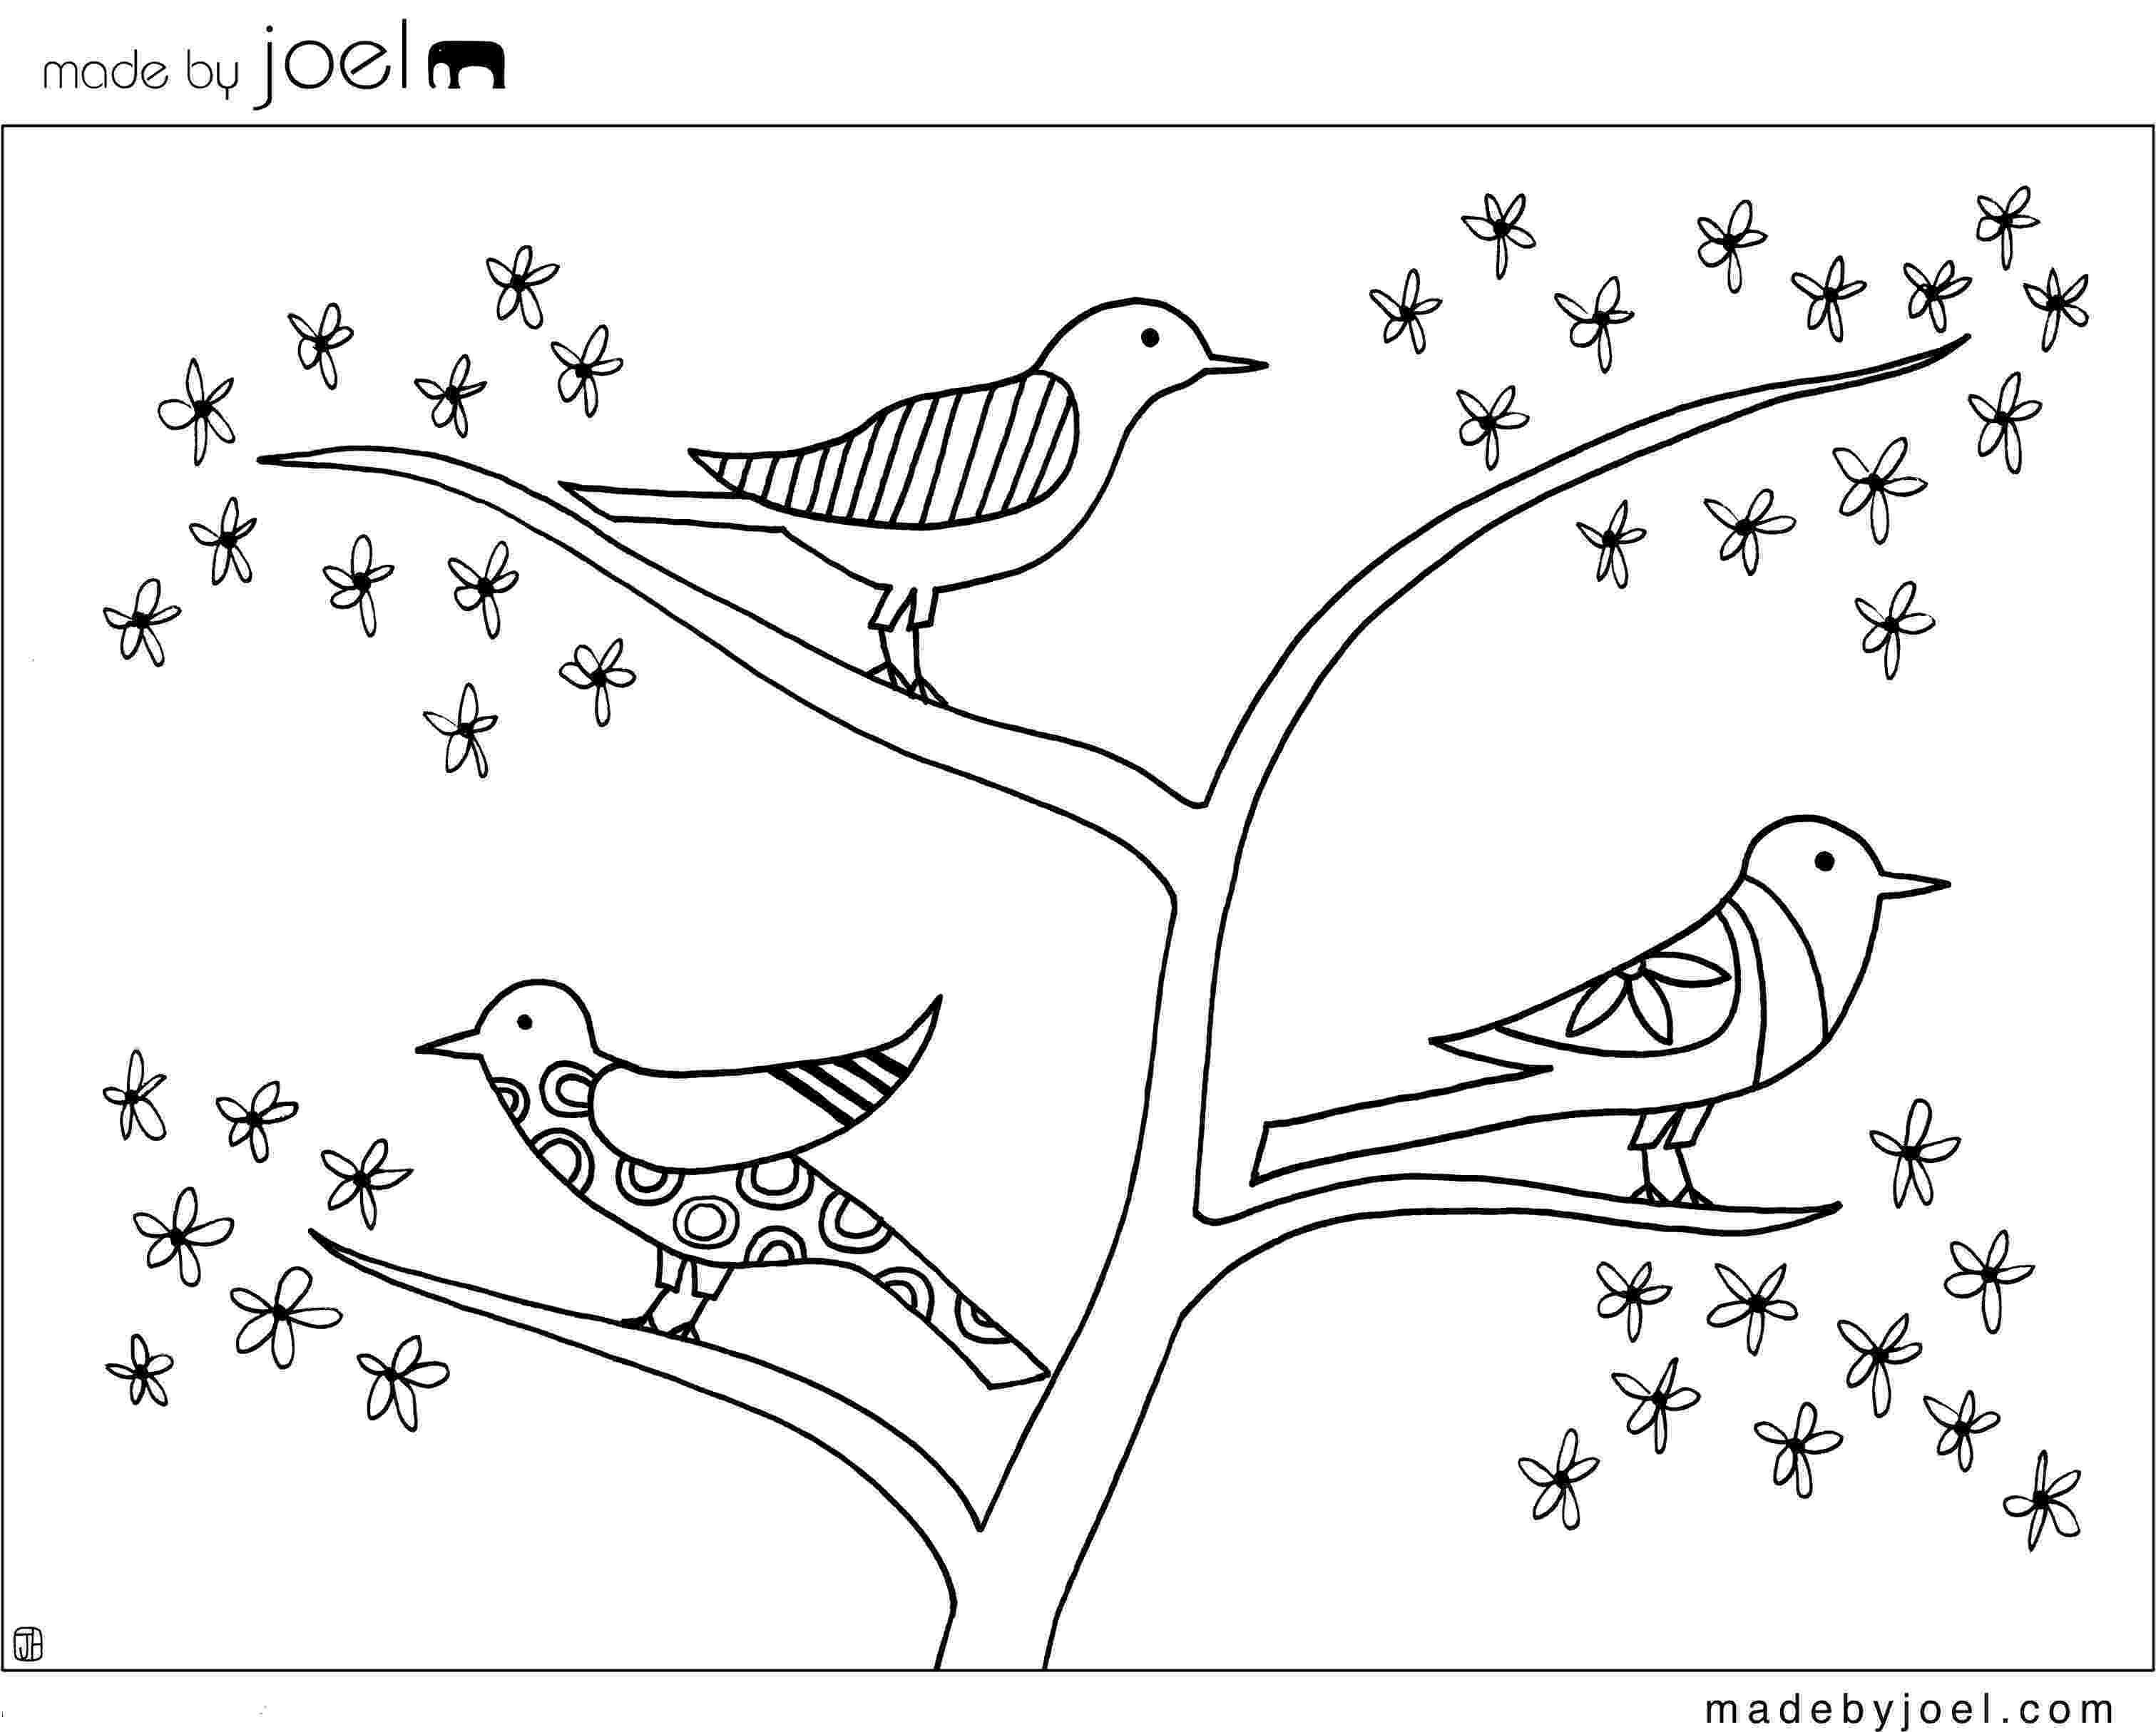 printable bird coloring pages birds coloring pages getcoloringpagescom bird coloring printable pages 